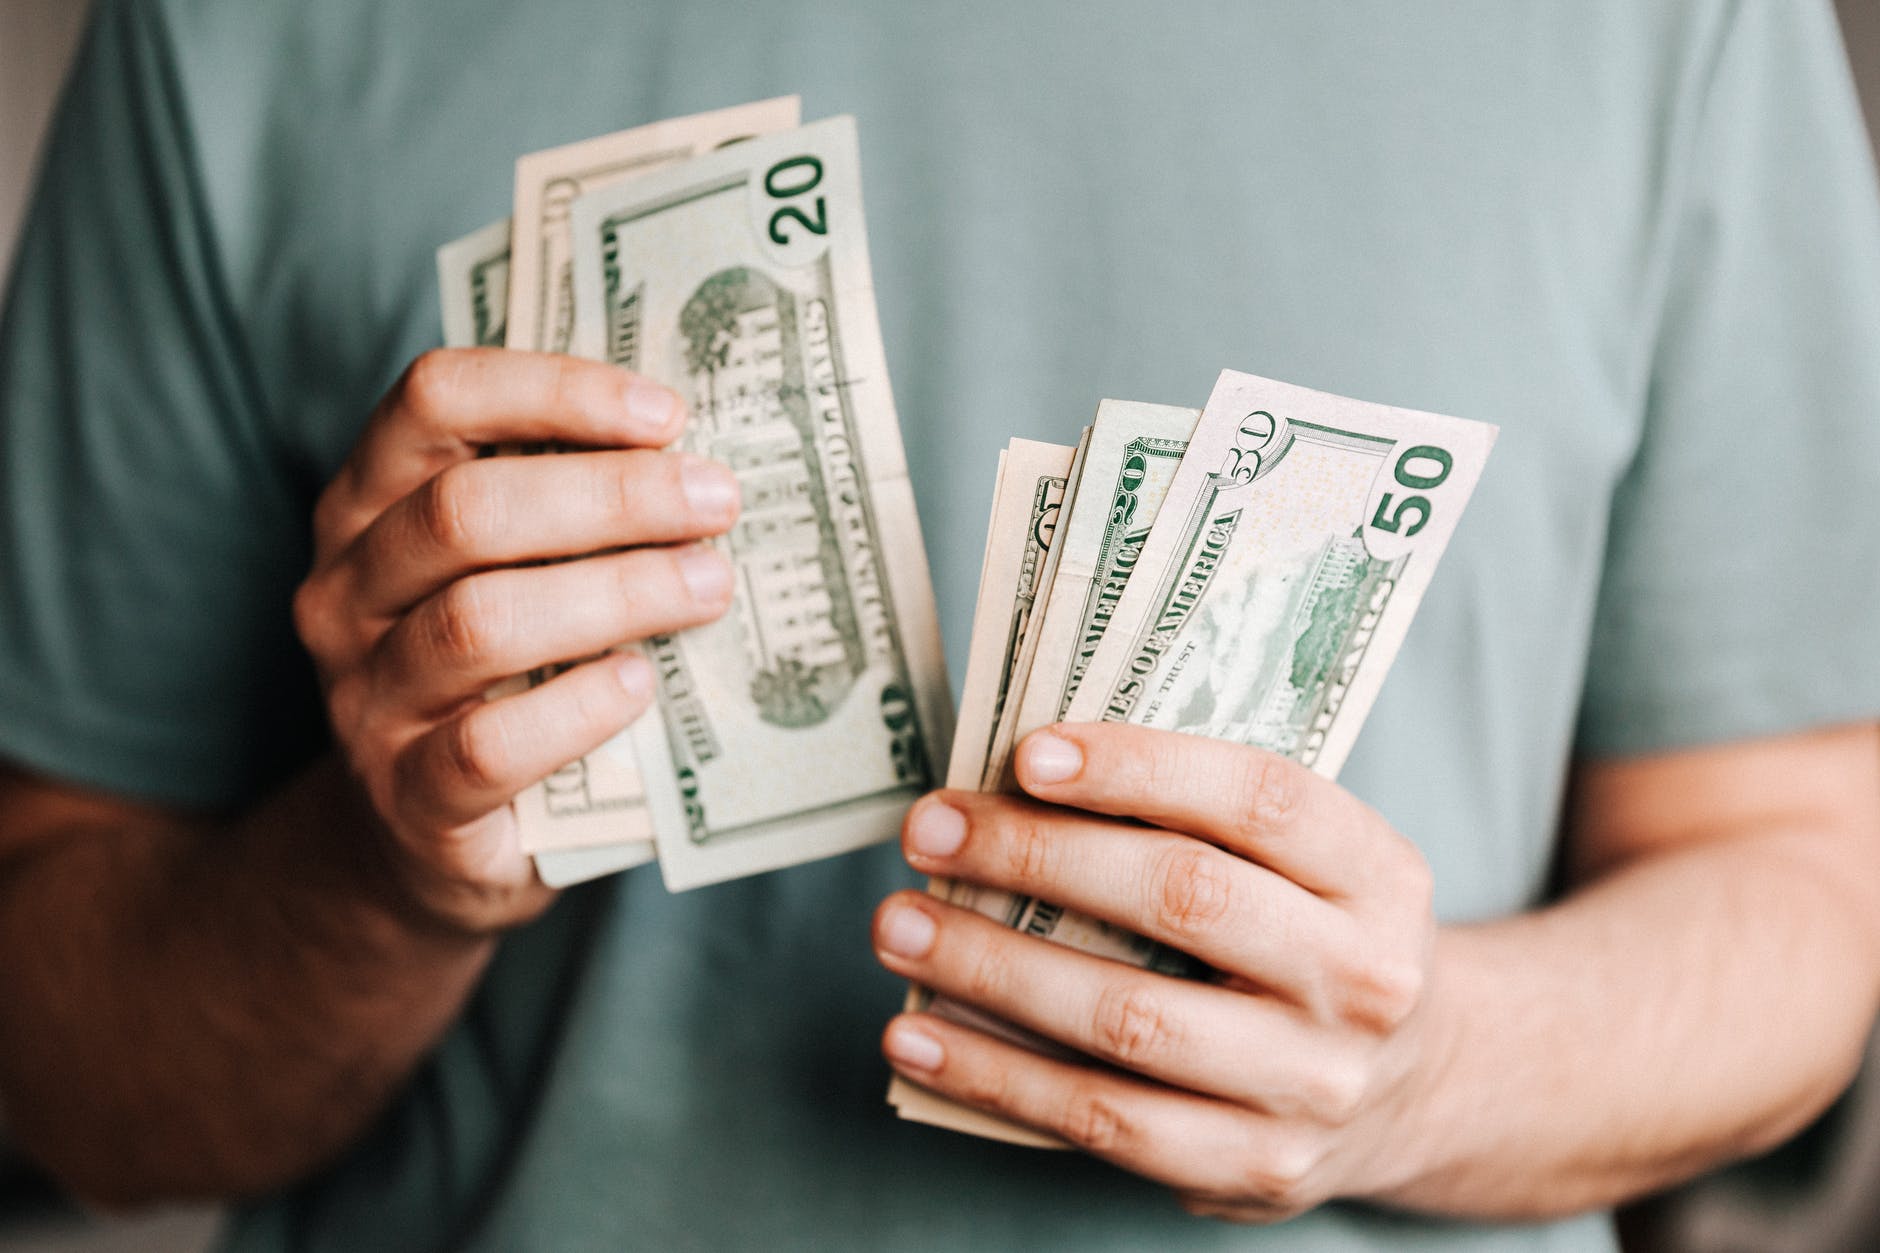 There was a letter among the dollar bills. | Source: Pexels